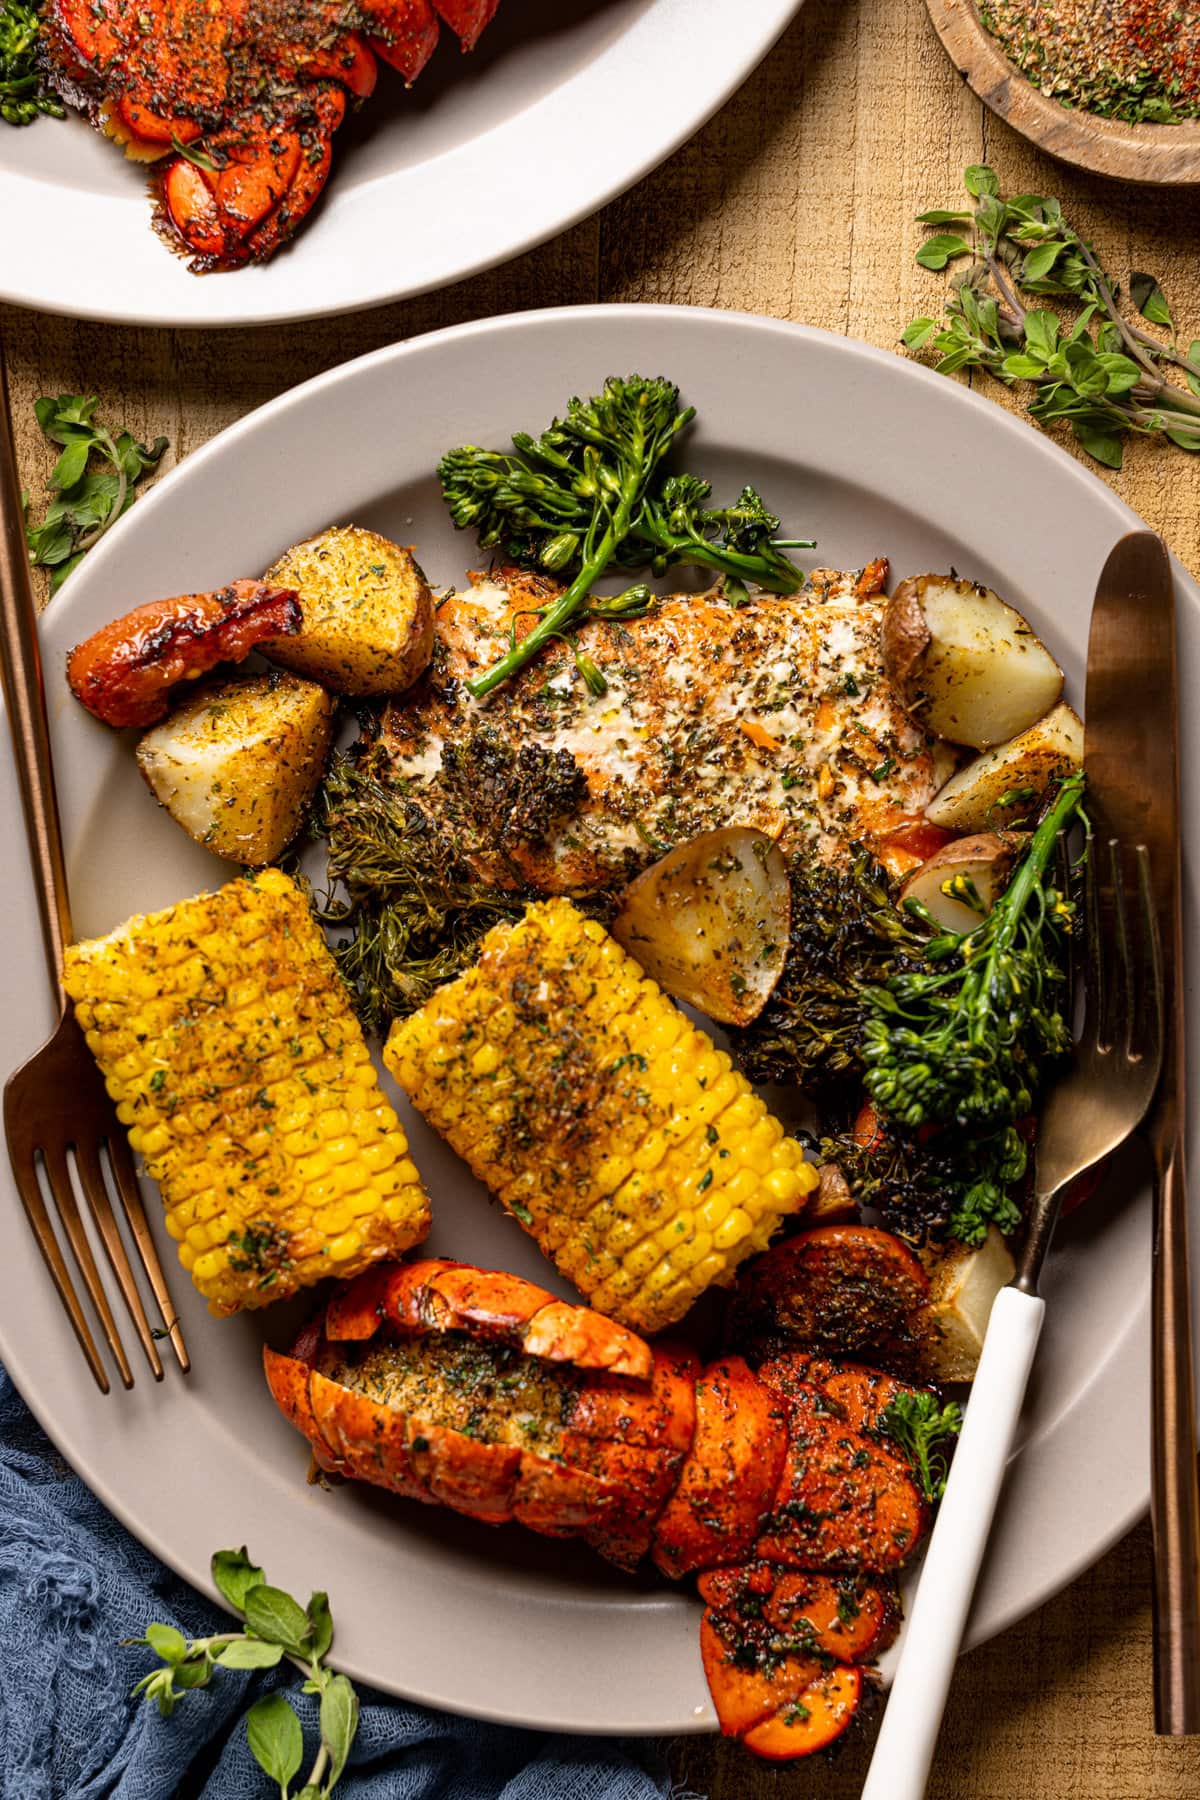 Plate and silverware with Garlic Herb Salmon, Lobster, and Veggies